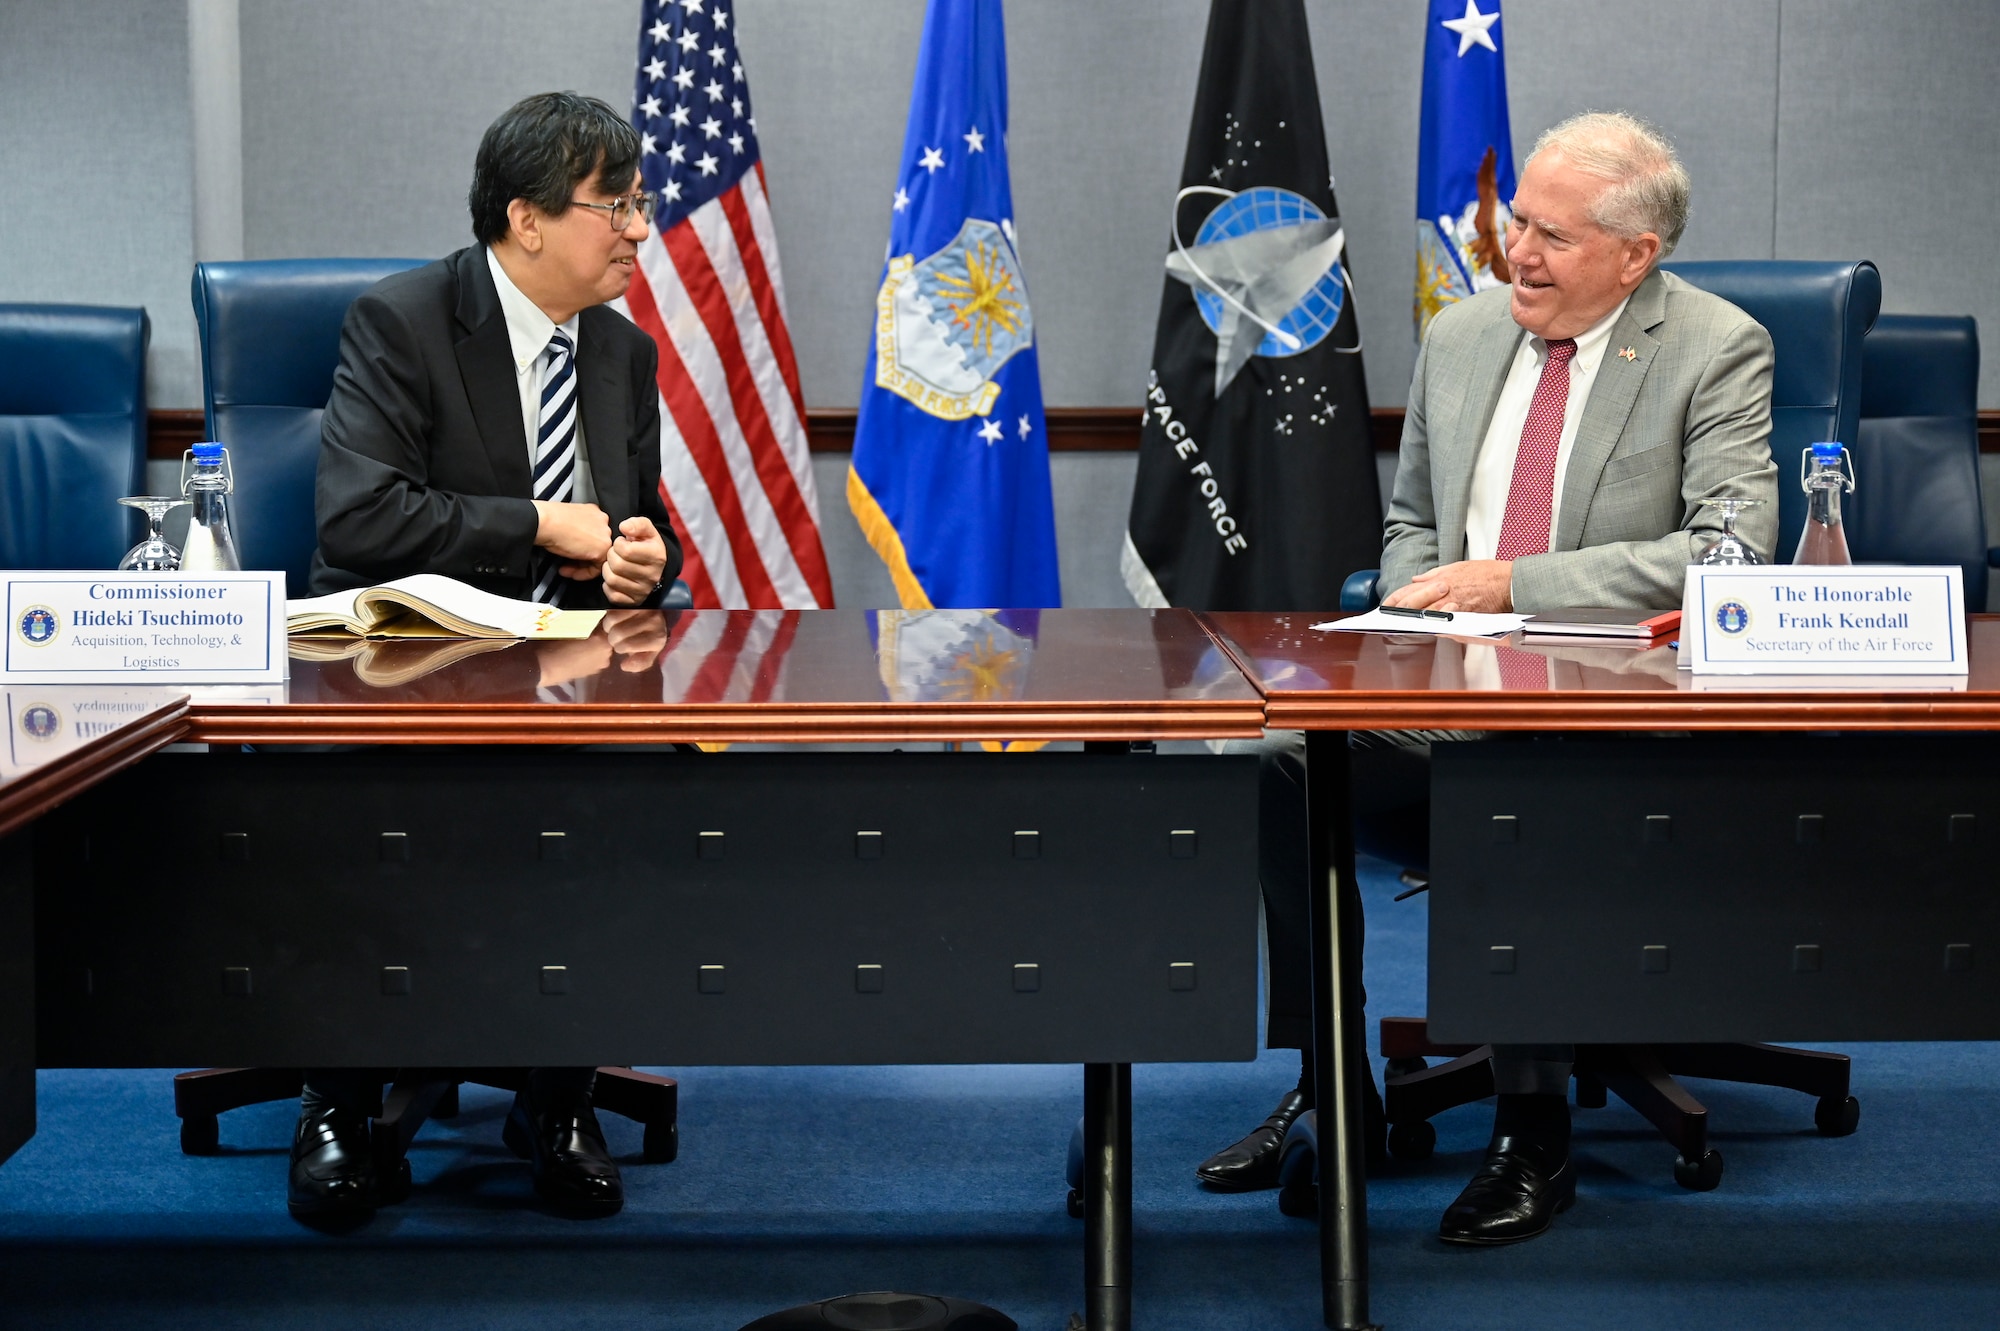 Secretary of the Air Force Frank Kendall speaks with Hideki Tsuchimoto, commissioner of the Acquisition, Technology and Logistics Agency, Japanese Ministry of Defense.